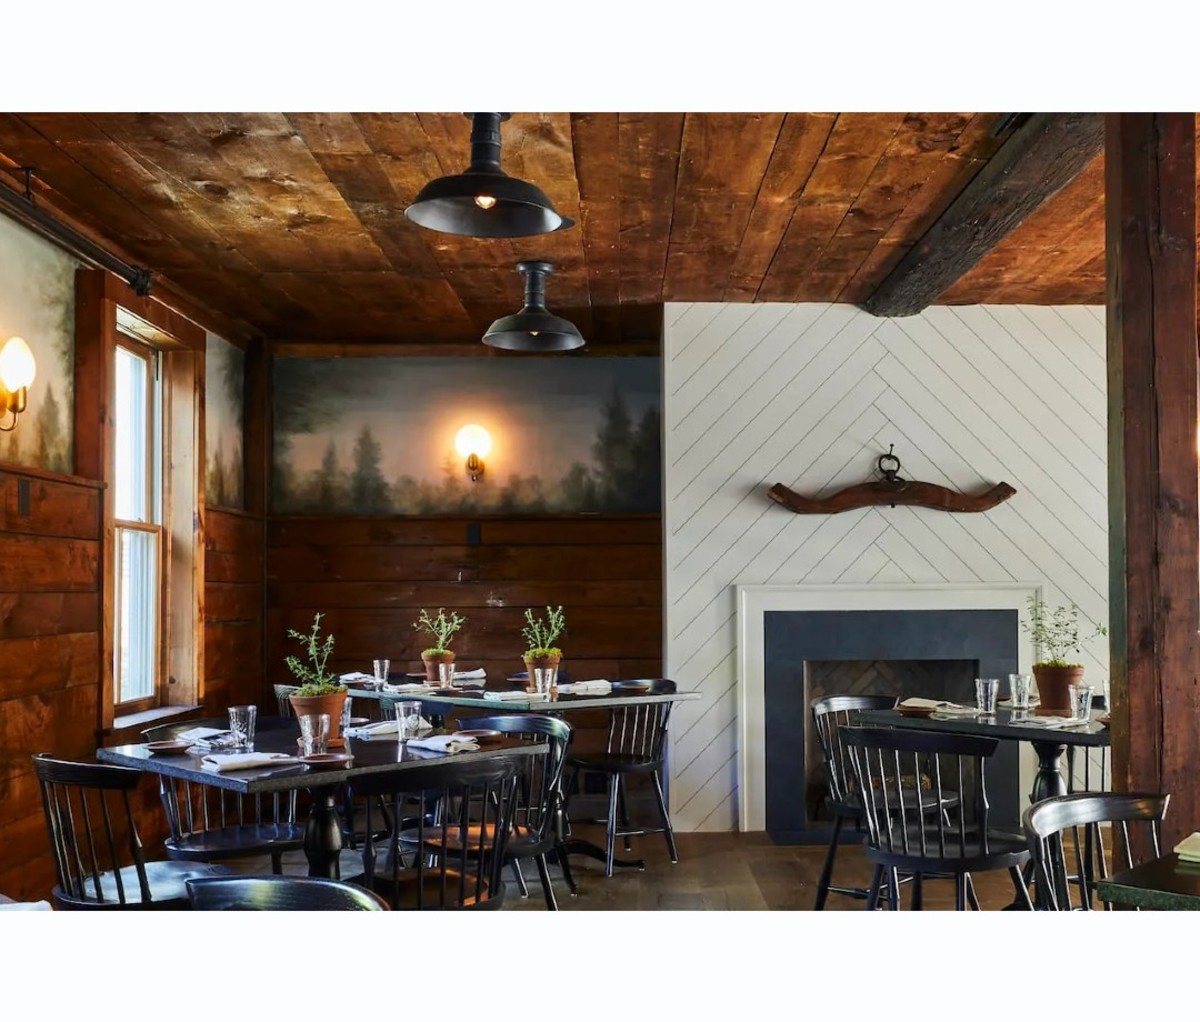 Restaurant dining room interior with wooden walls